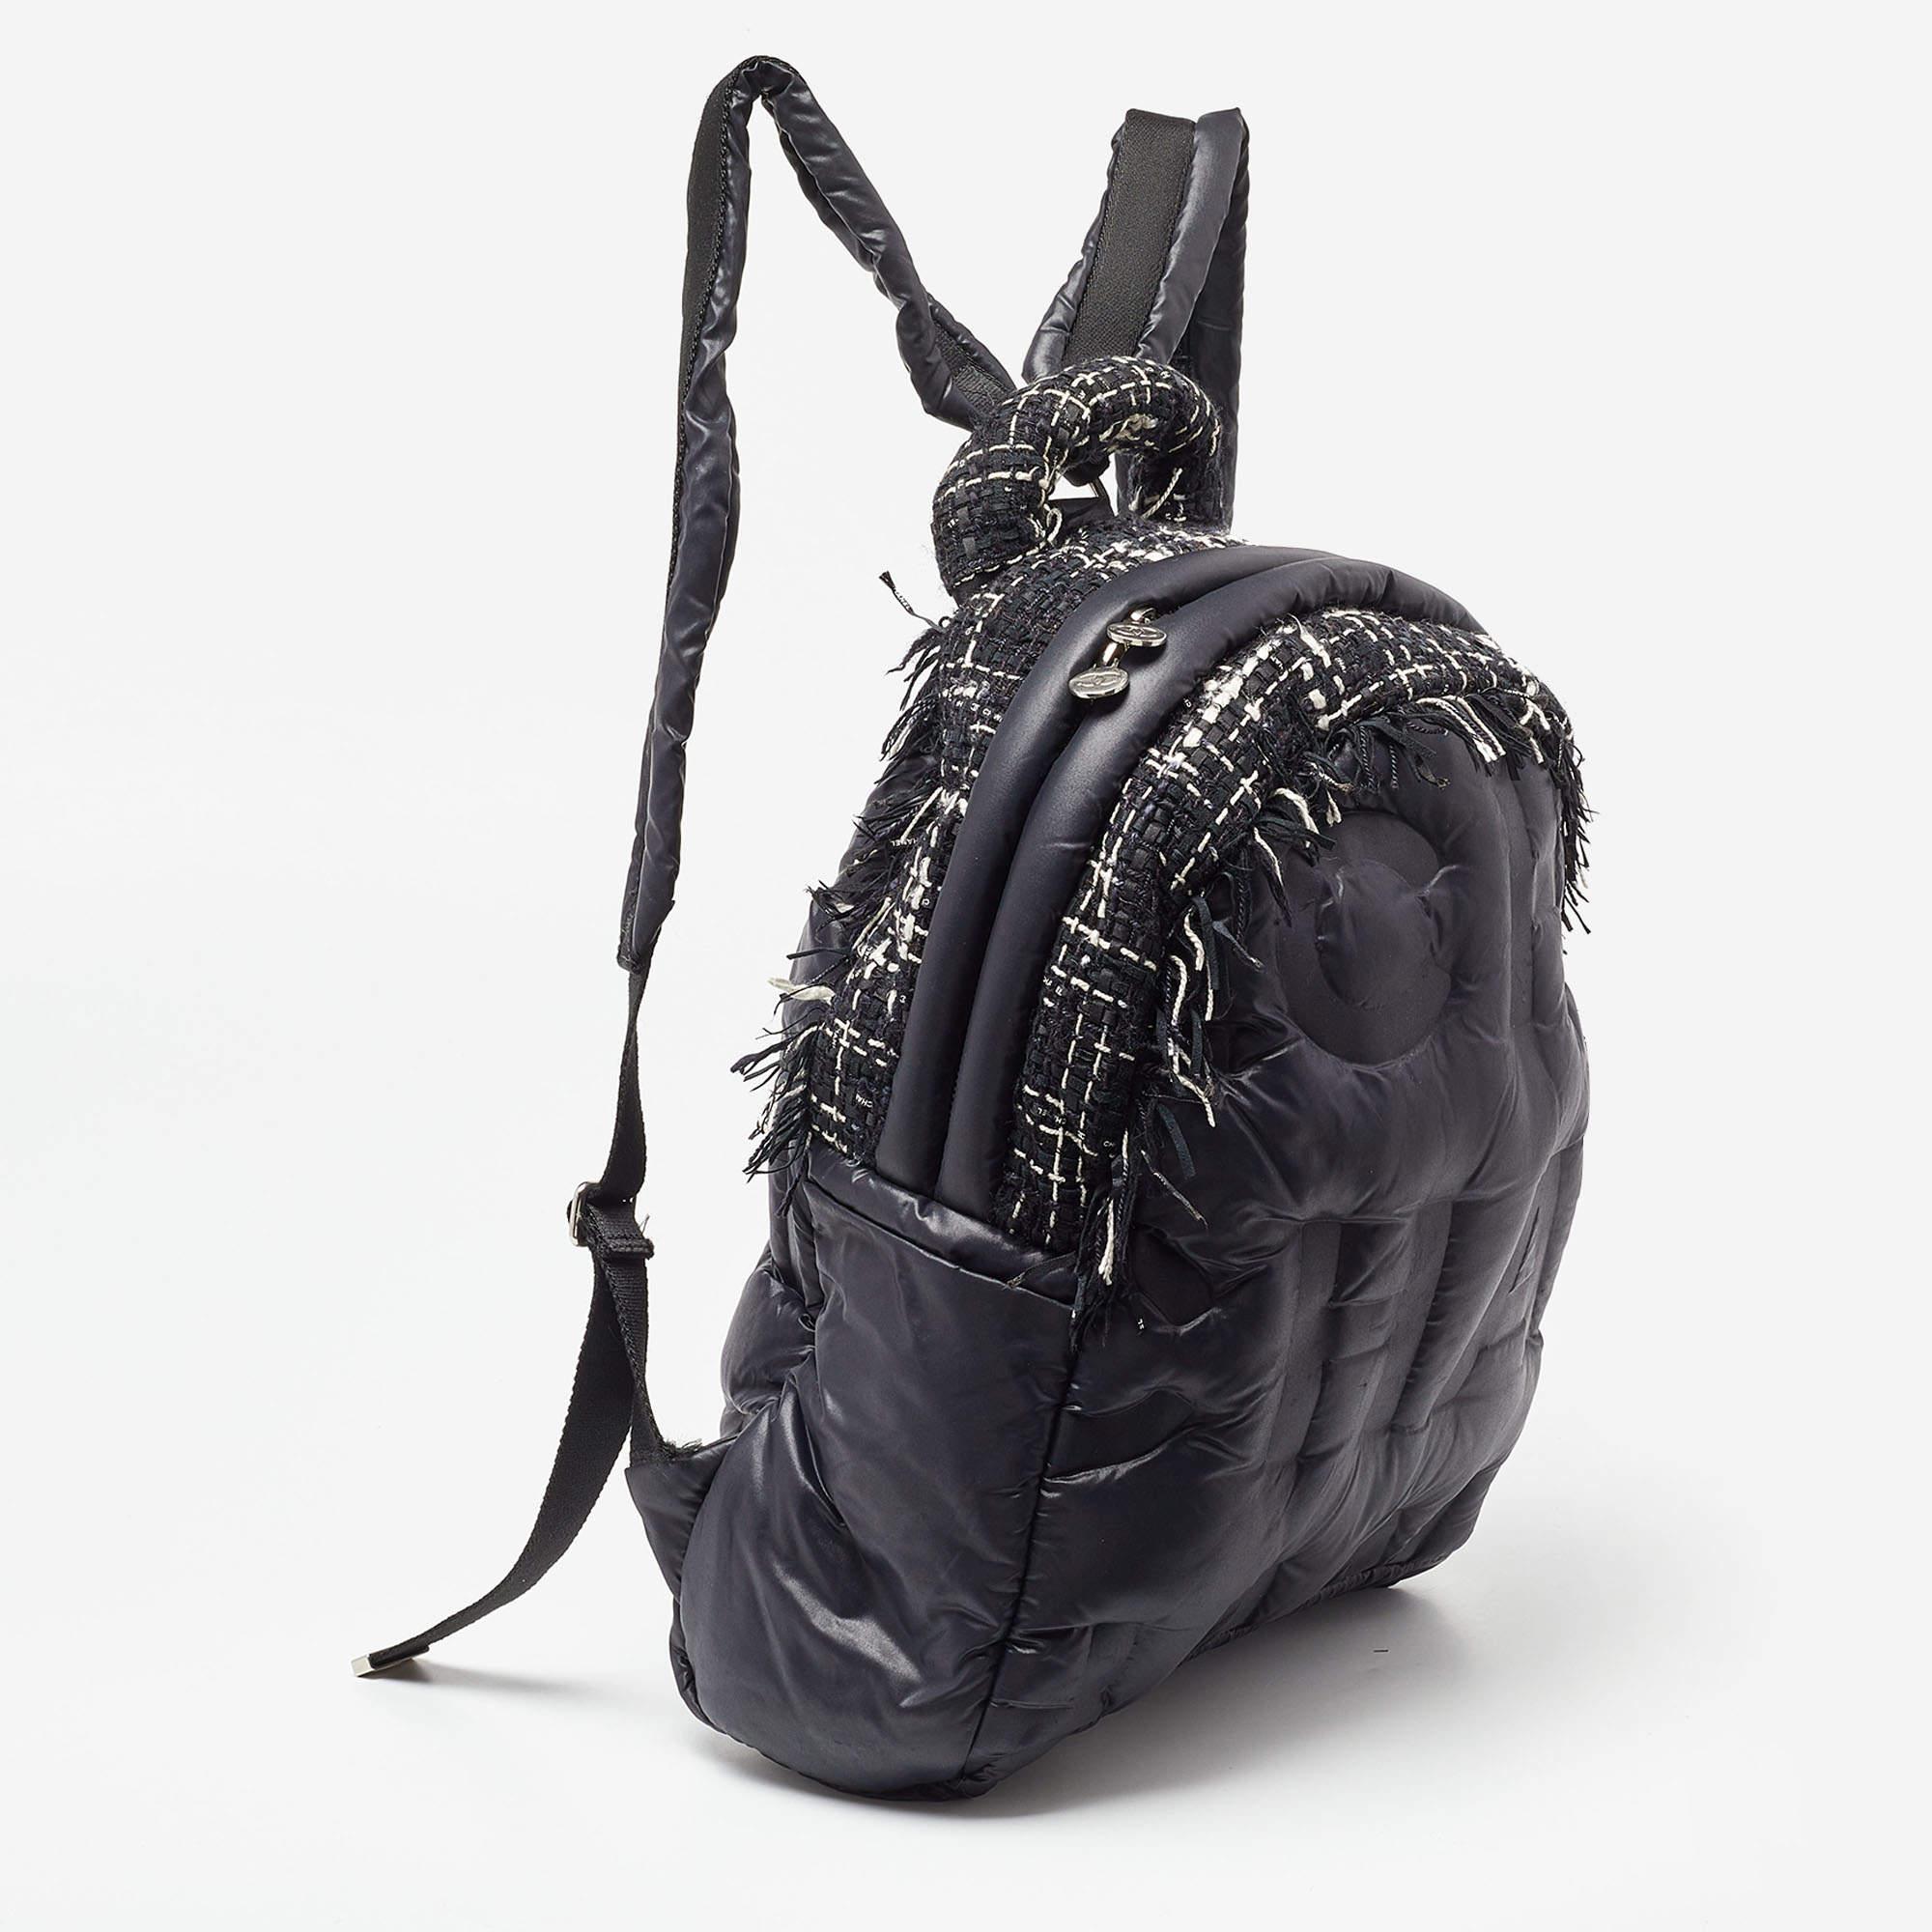 Marked by flawless craftsmanship and enduring appeal, this Chanel backpack is bound to be a versatile and durable accessory. It has a practical size.

